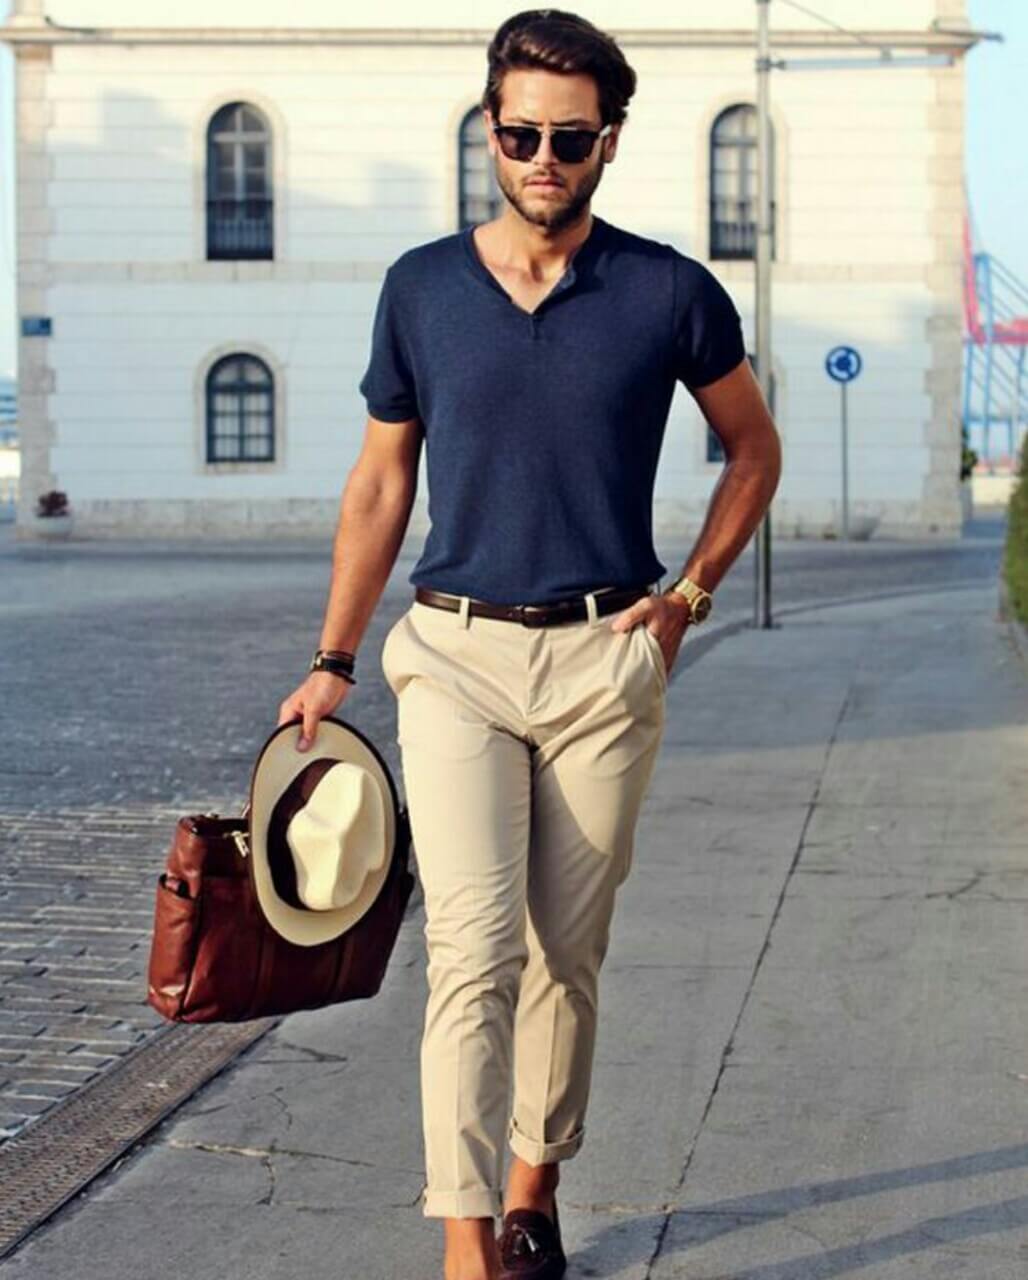 31 Men’s Style Outfits Every Guy Should Look At For Inspiration – Page 10